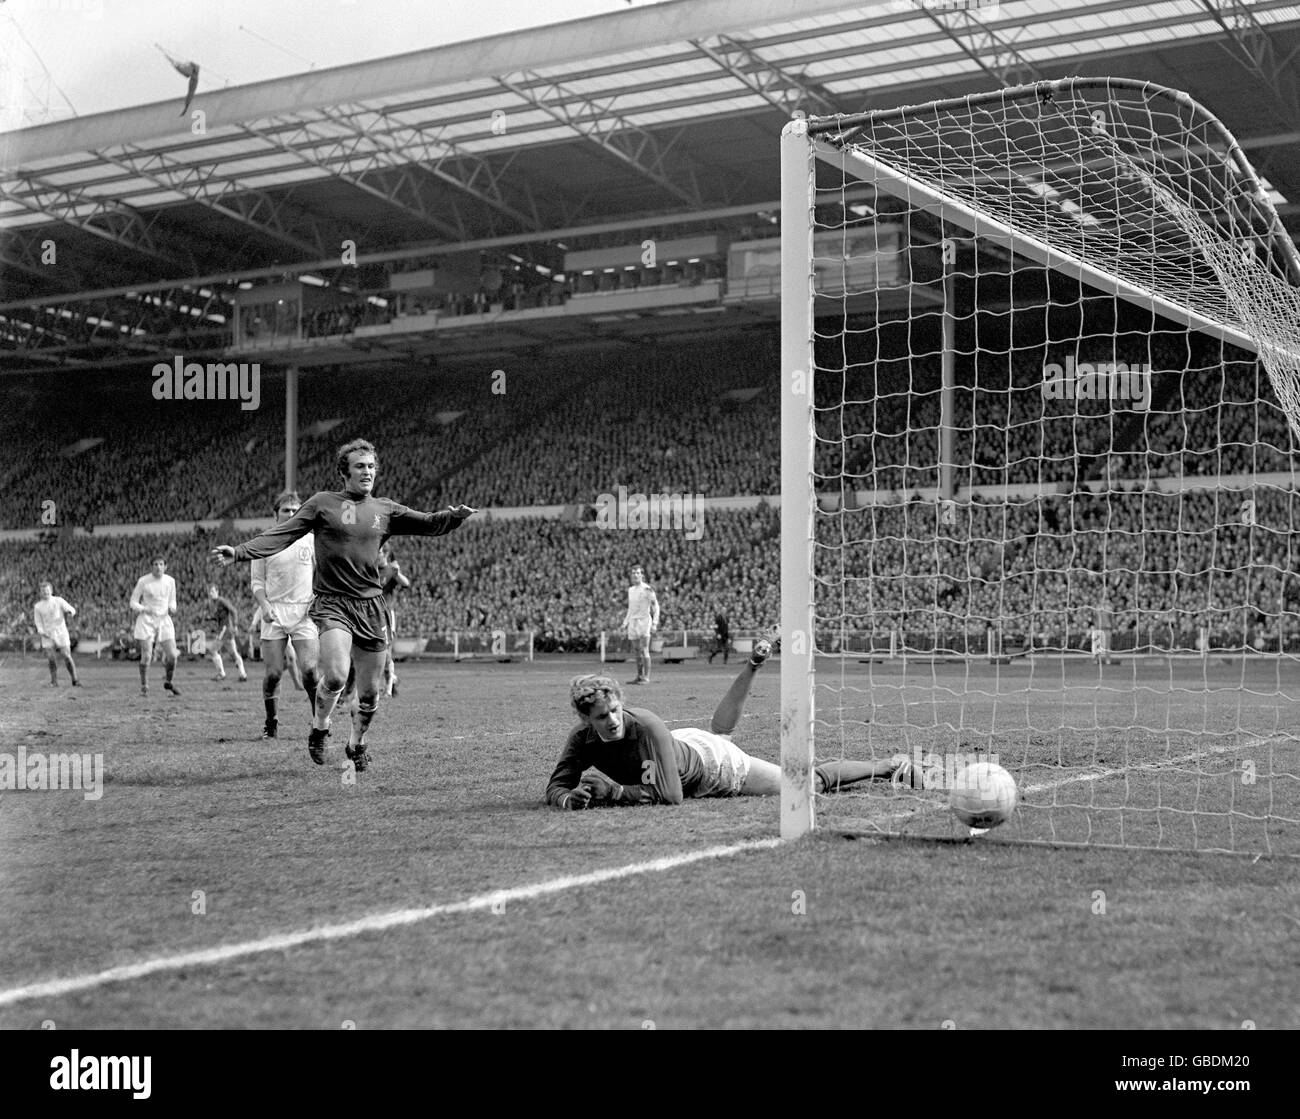 Leeds United goalkeeper Gary Sprake (r) looks back in despair at the ball after he let a soft shot from Chelsea's Peter Houseman (third l, background) sneak under his body for the opening goal. Chelsea's Tommy Baldwin (c) begins to celebrate Stock Photo